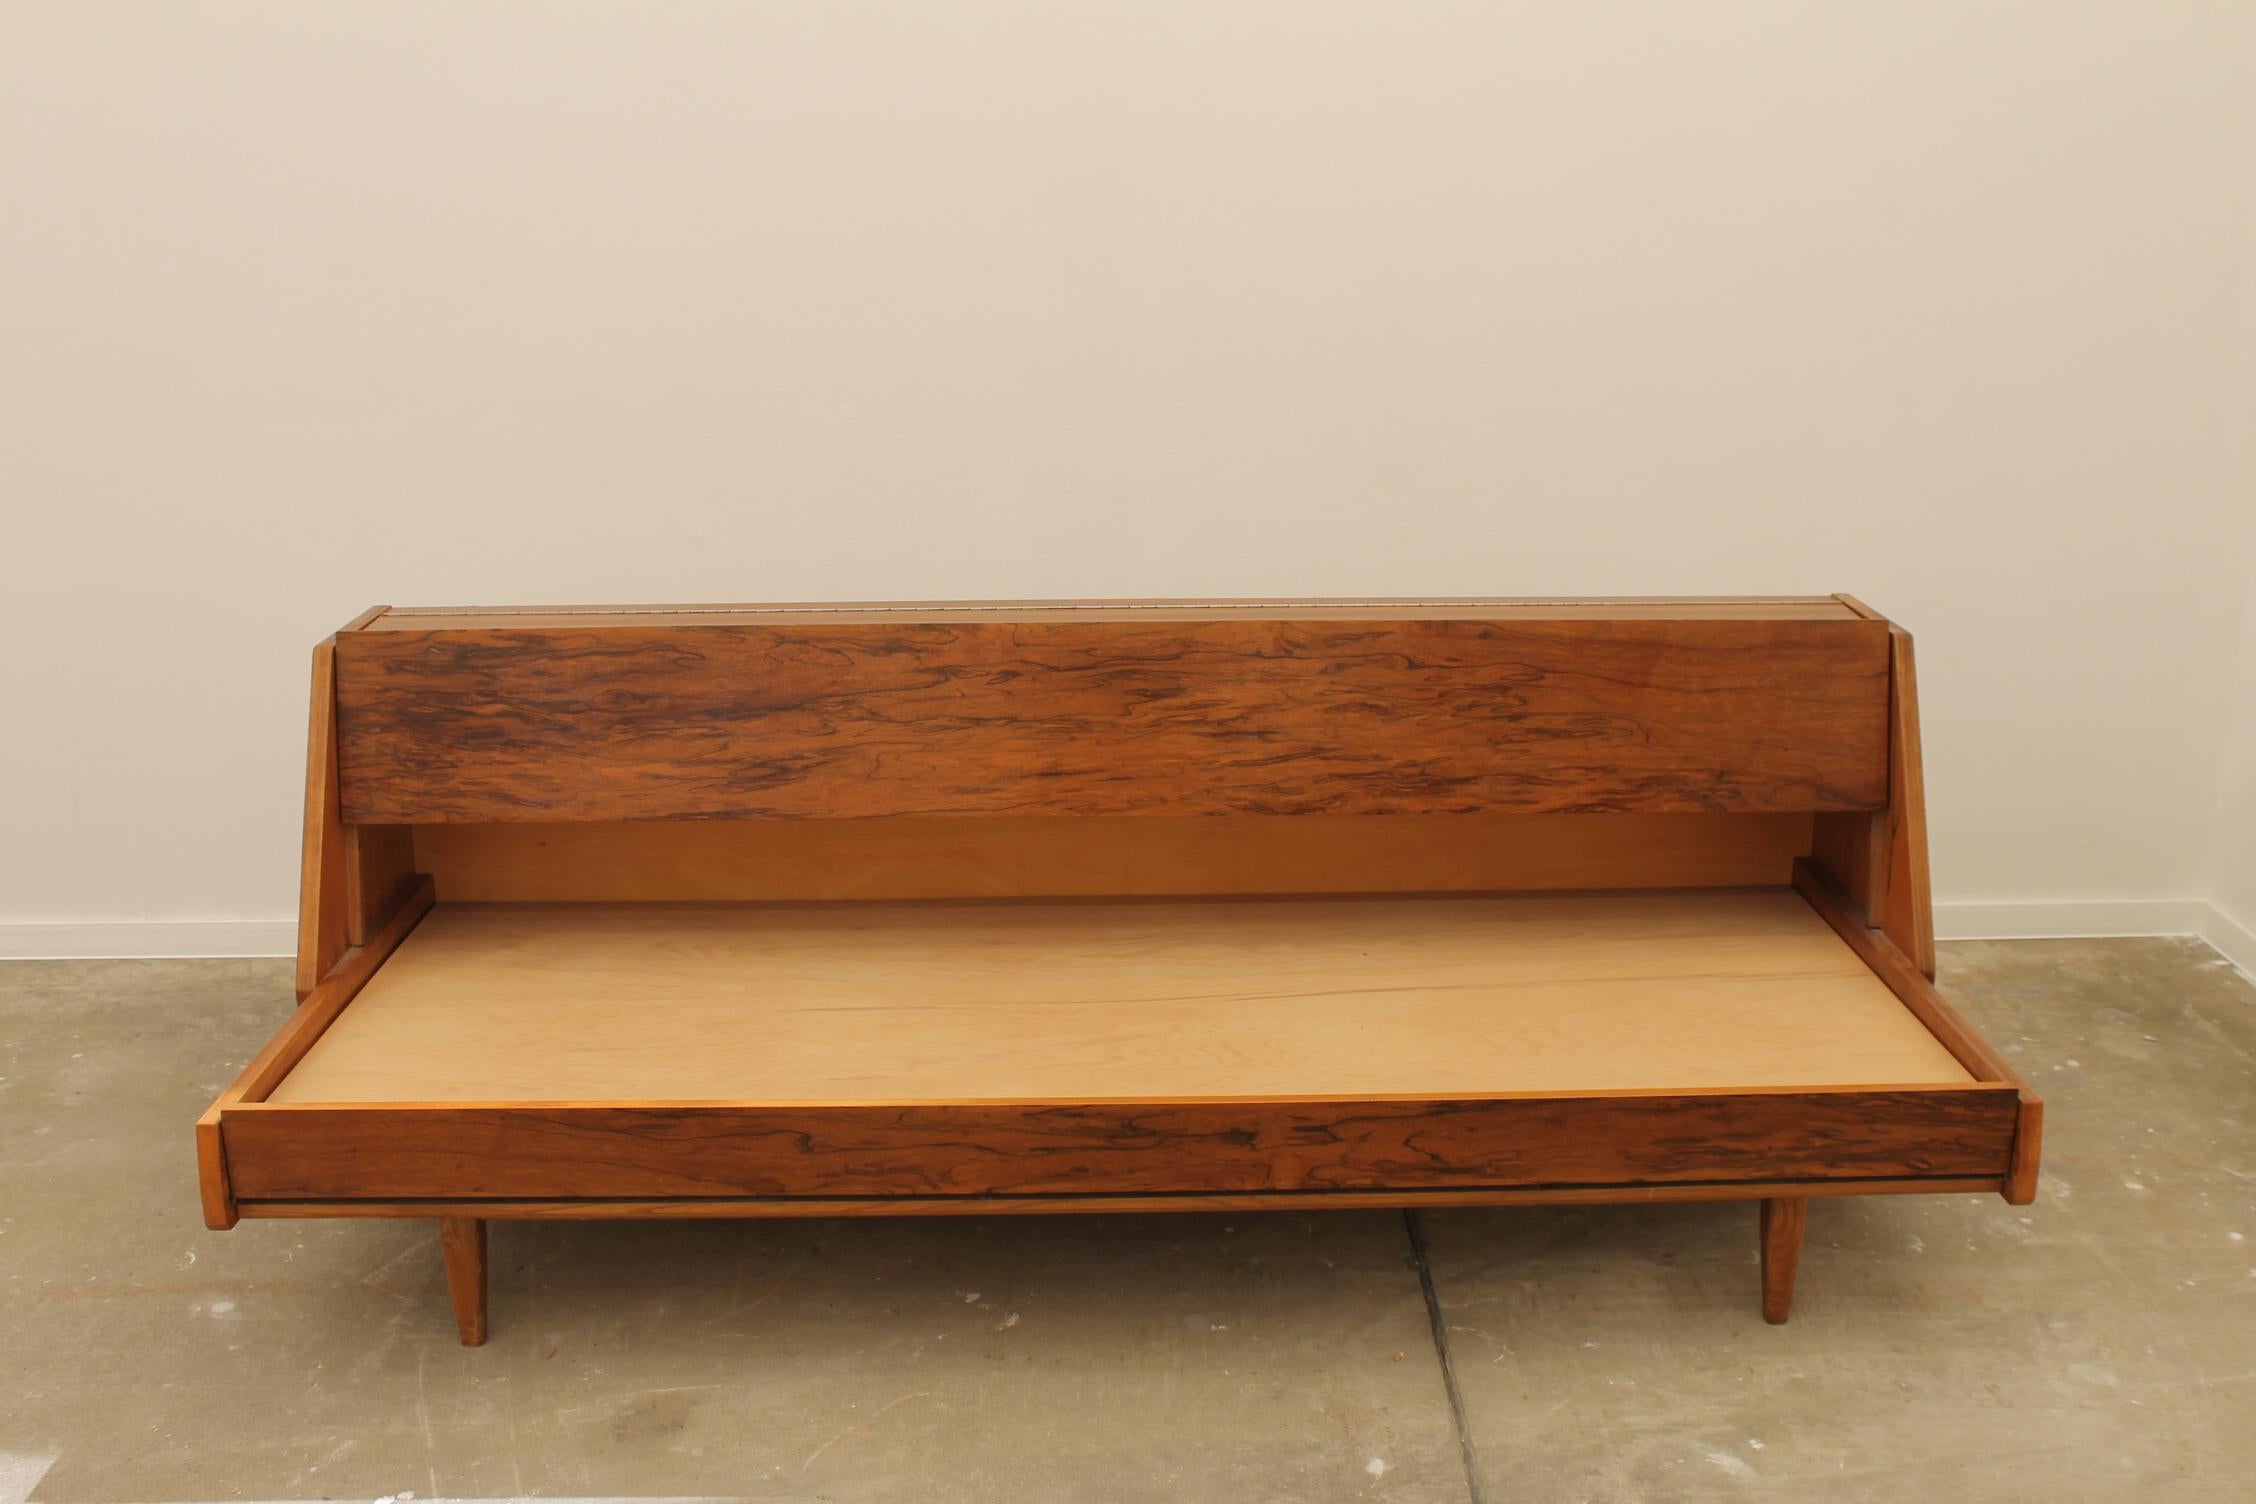 Midcentury sofa bed,made in the former Czechoslovakia in the 1970s. The sofa has a wooden structure with walnut veneer, it´s in very good condition, shows slight signs of age and using.

Lenght: 201 cm

Height: 70 cm
Depth: 83 cm

Sleeping